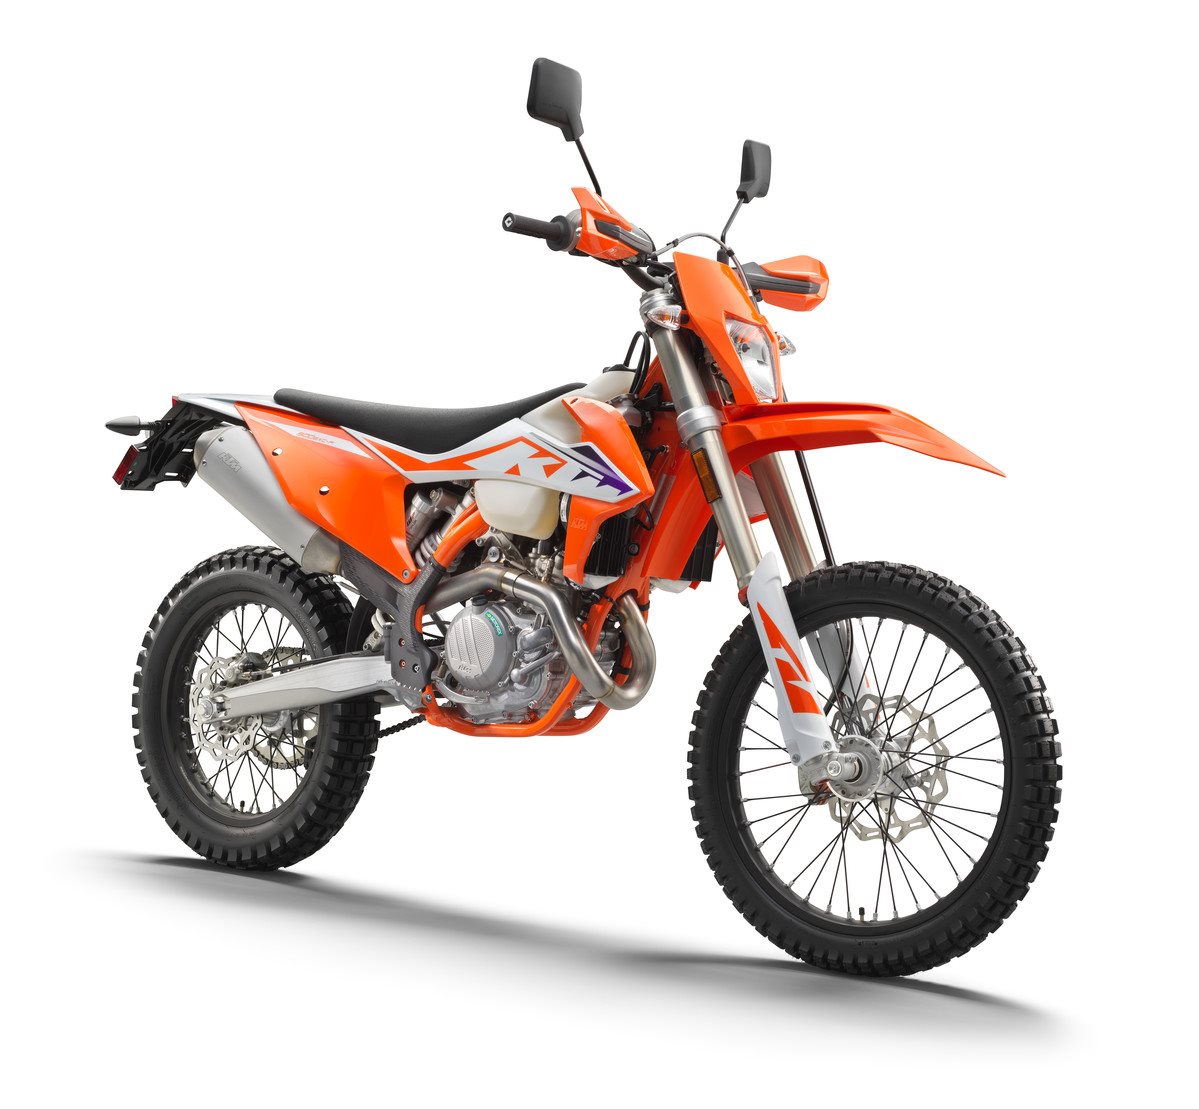 430019_MY23 KTM 500 EXC-F - US _front right_